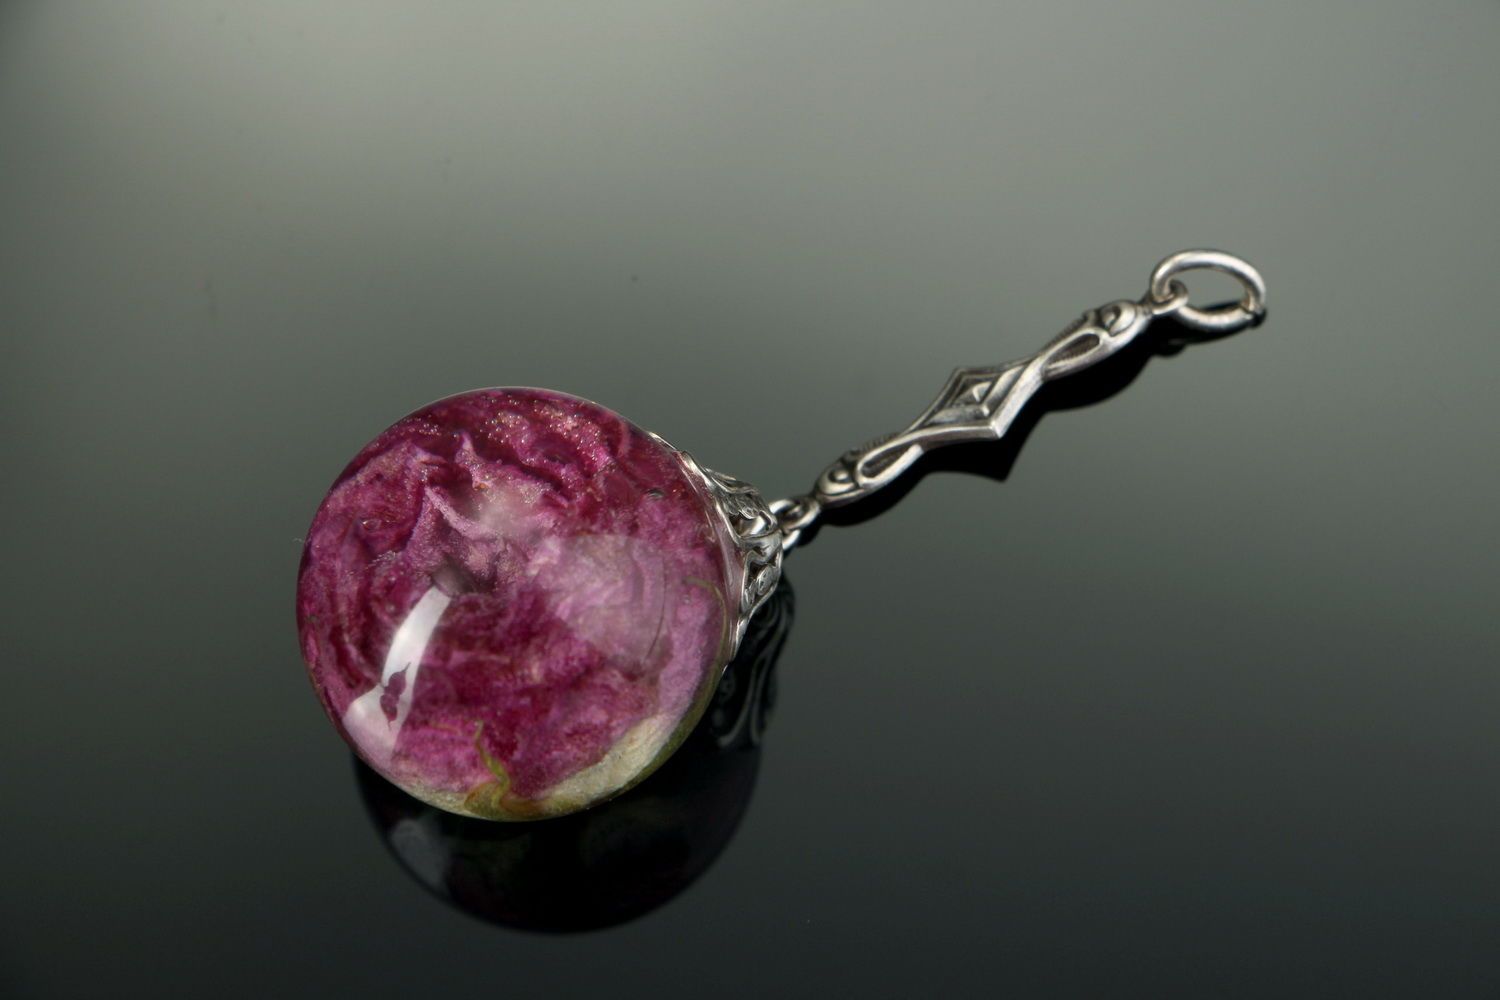 Pendant made of rose embedded in epoxy photo 1